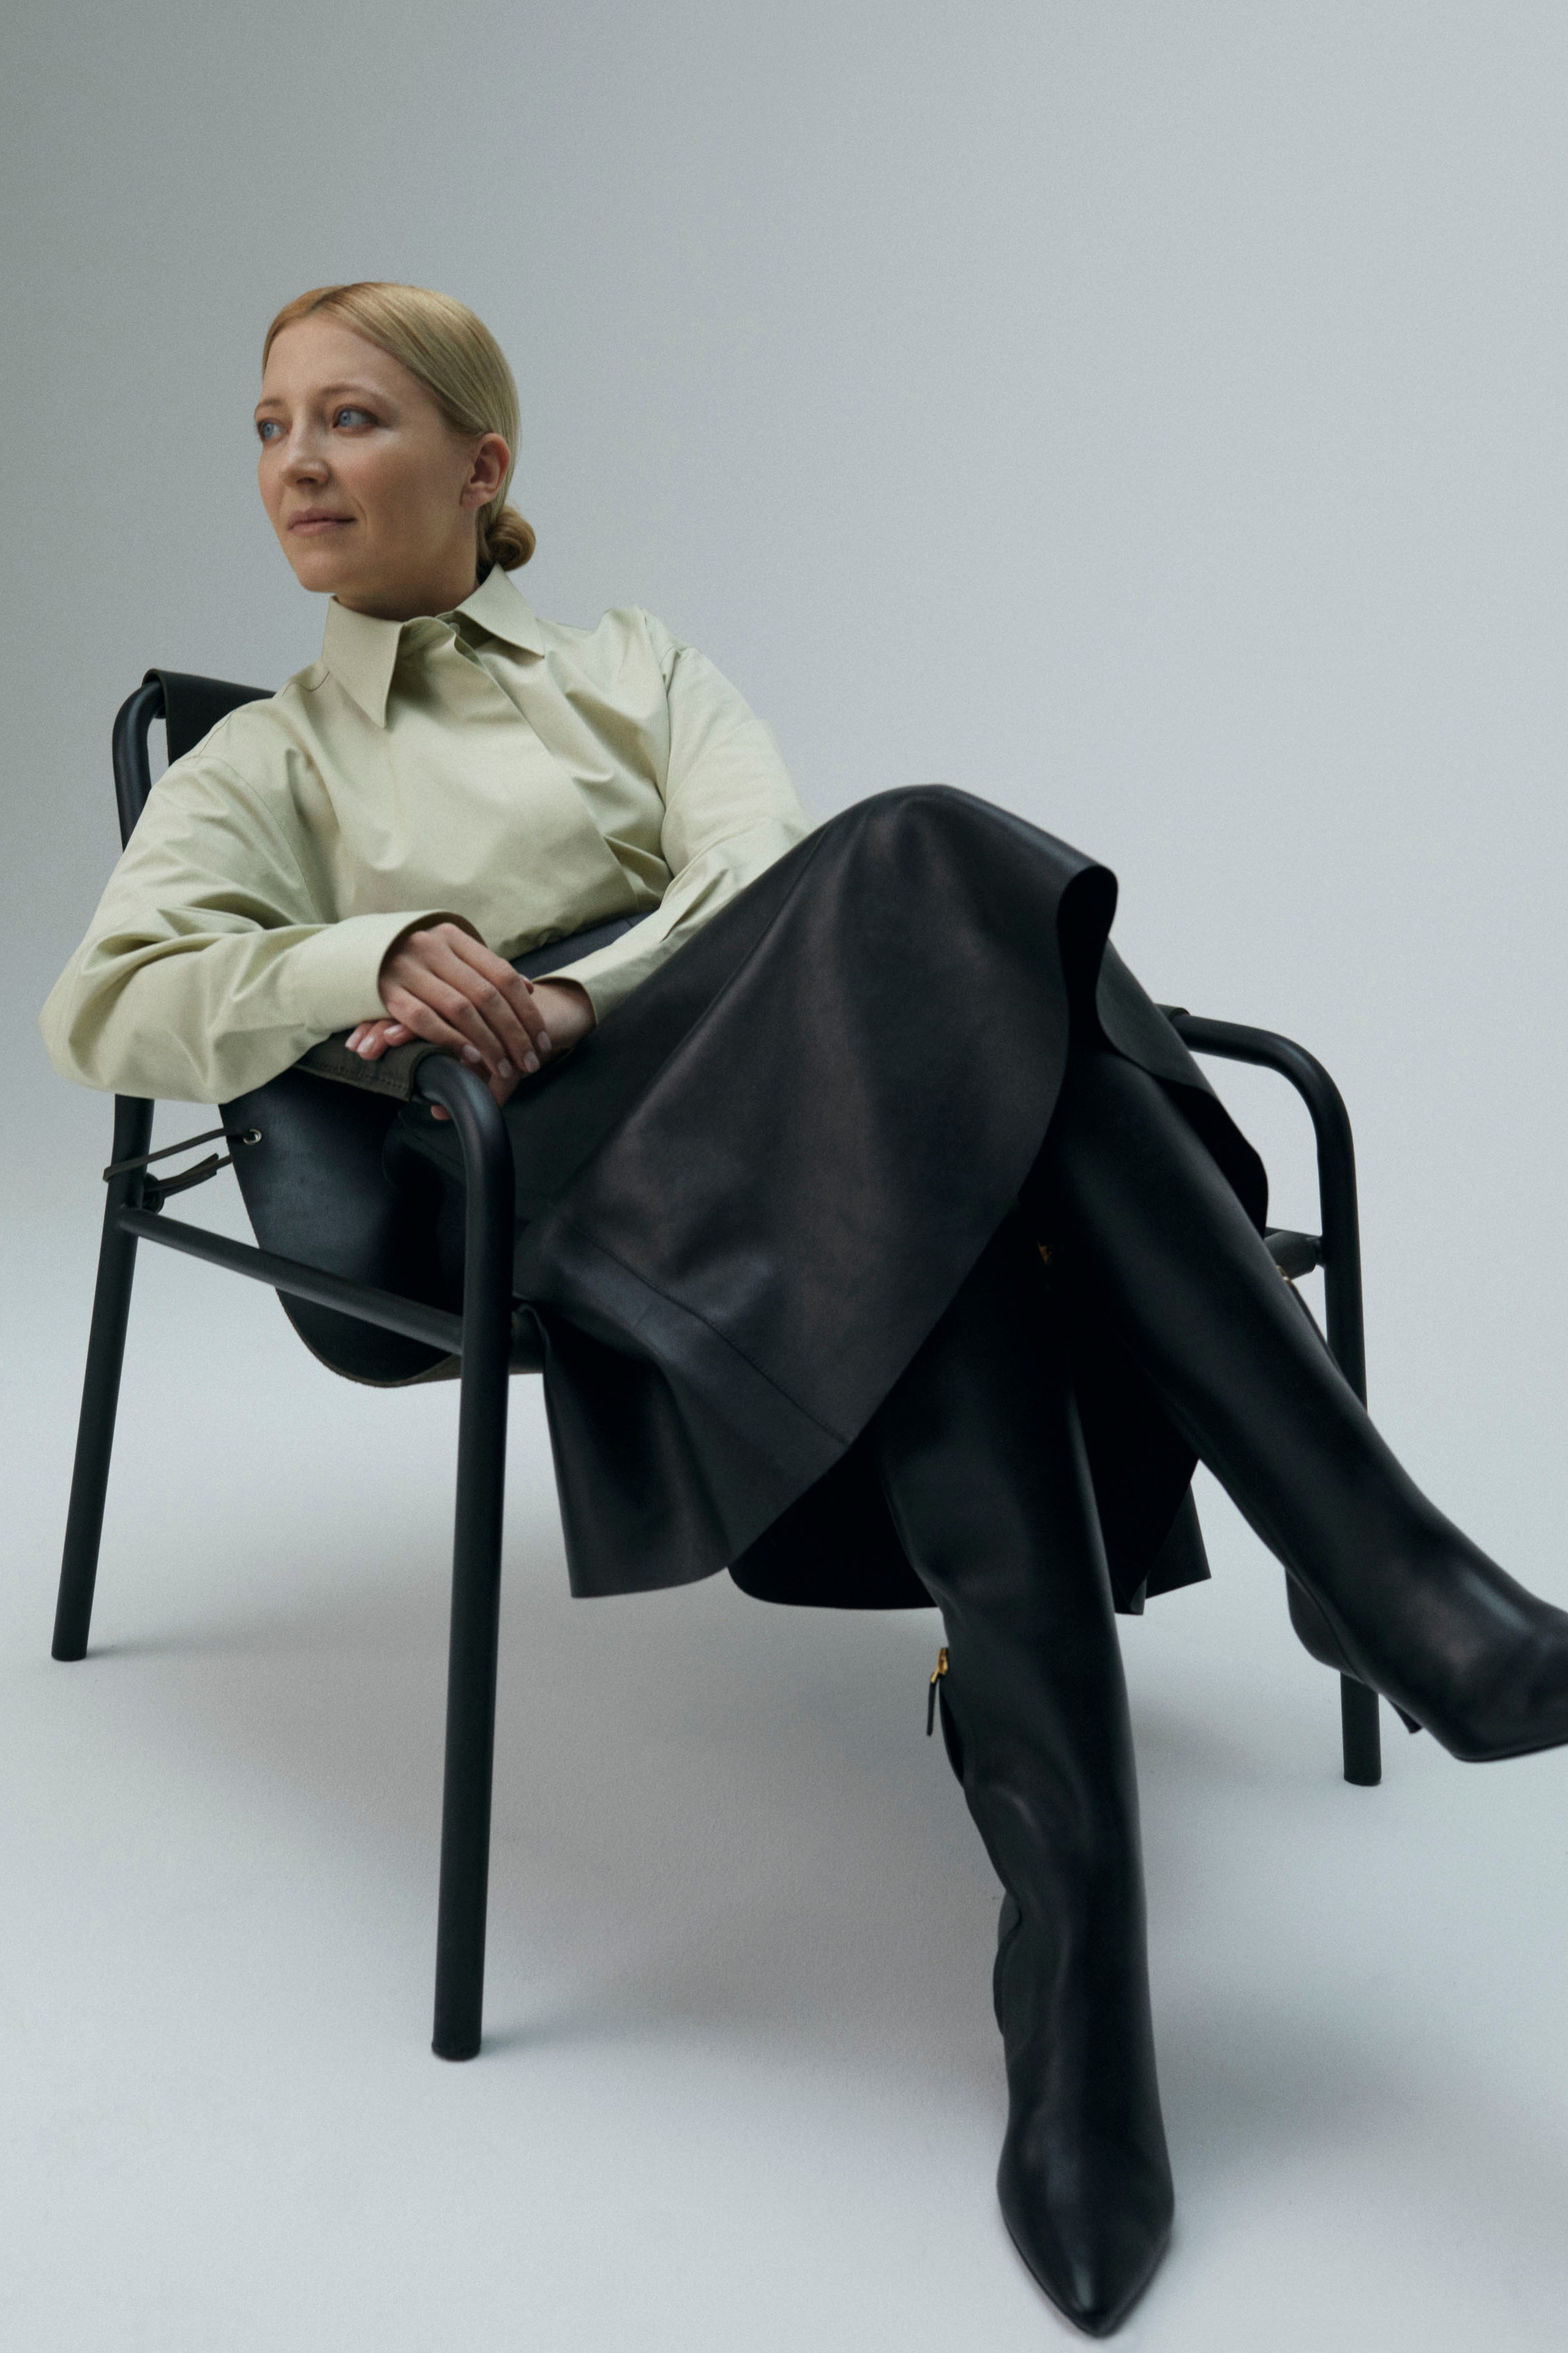 Daria wearing cotton shirt leather skirt and leather boots sitting on chair